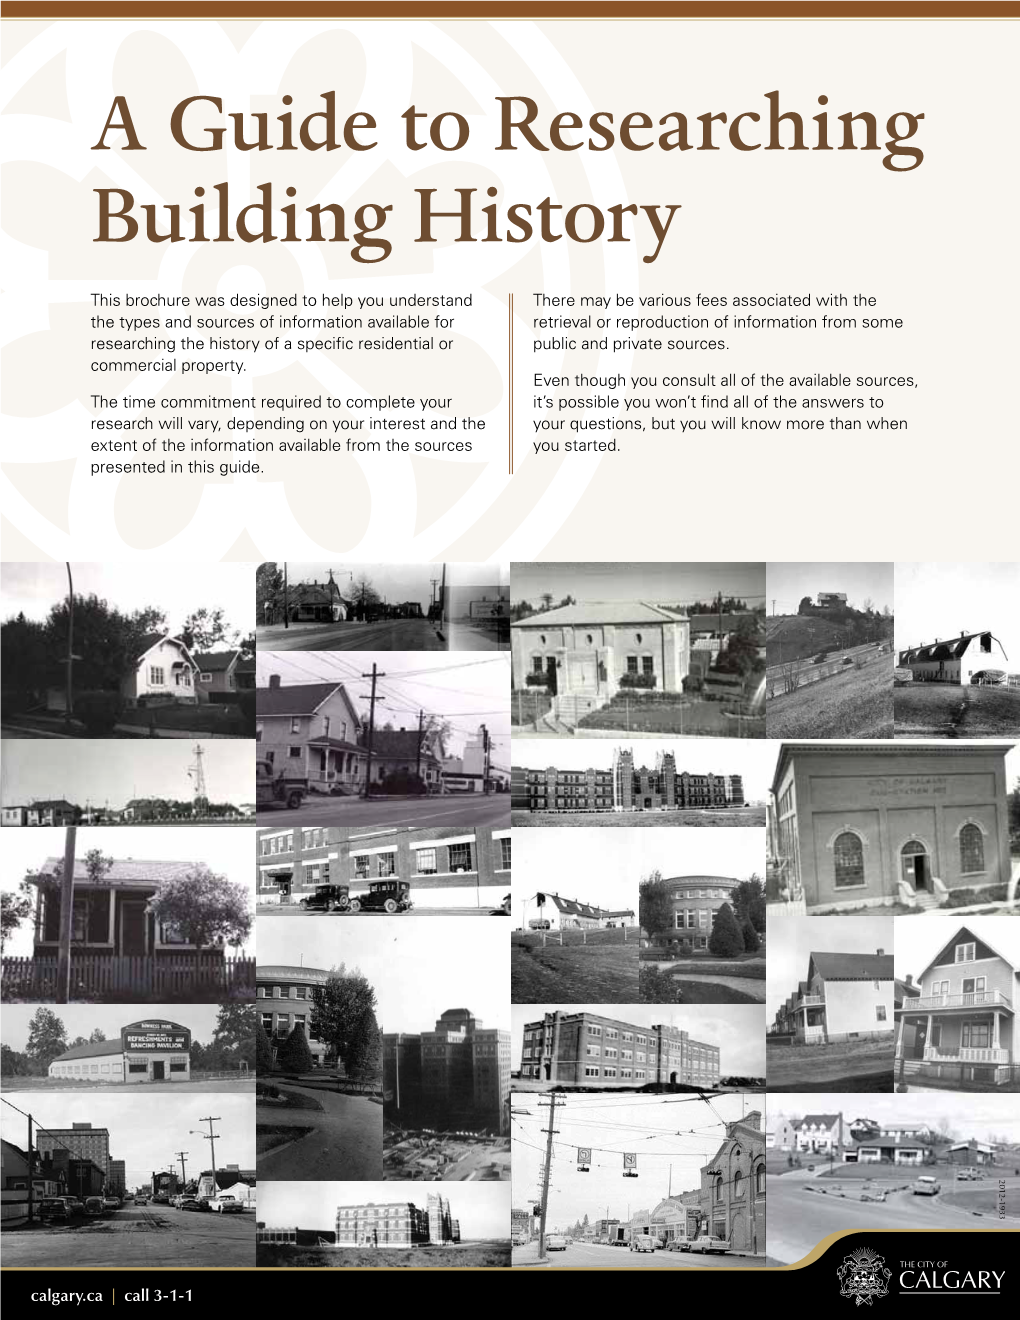 A Guide to Researching Building History